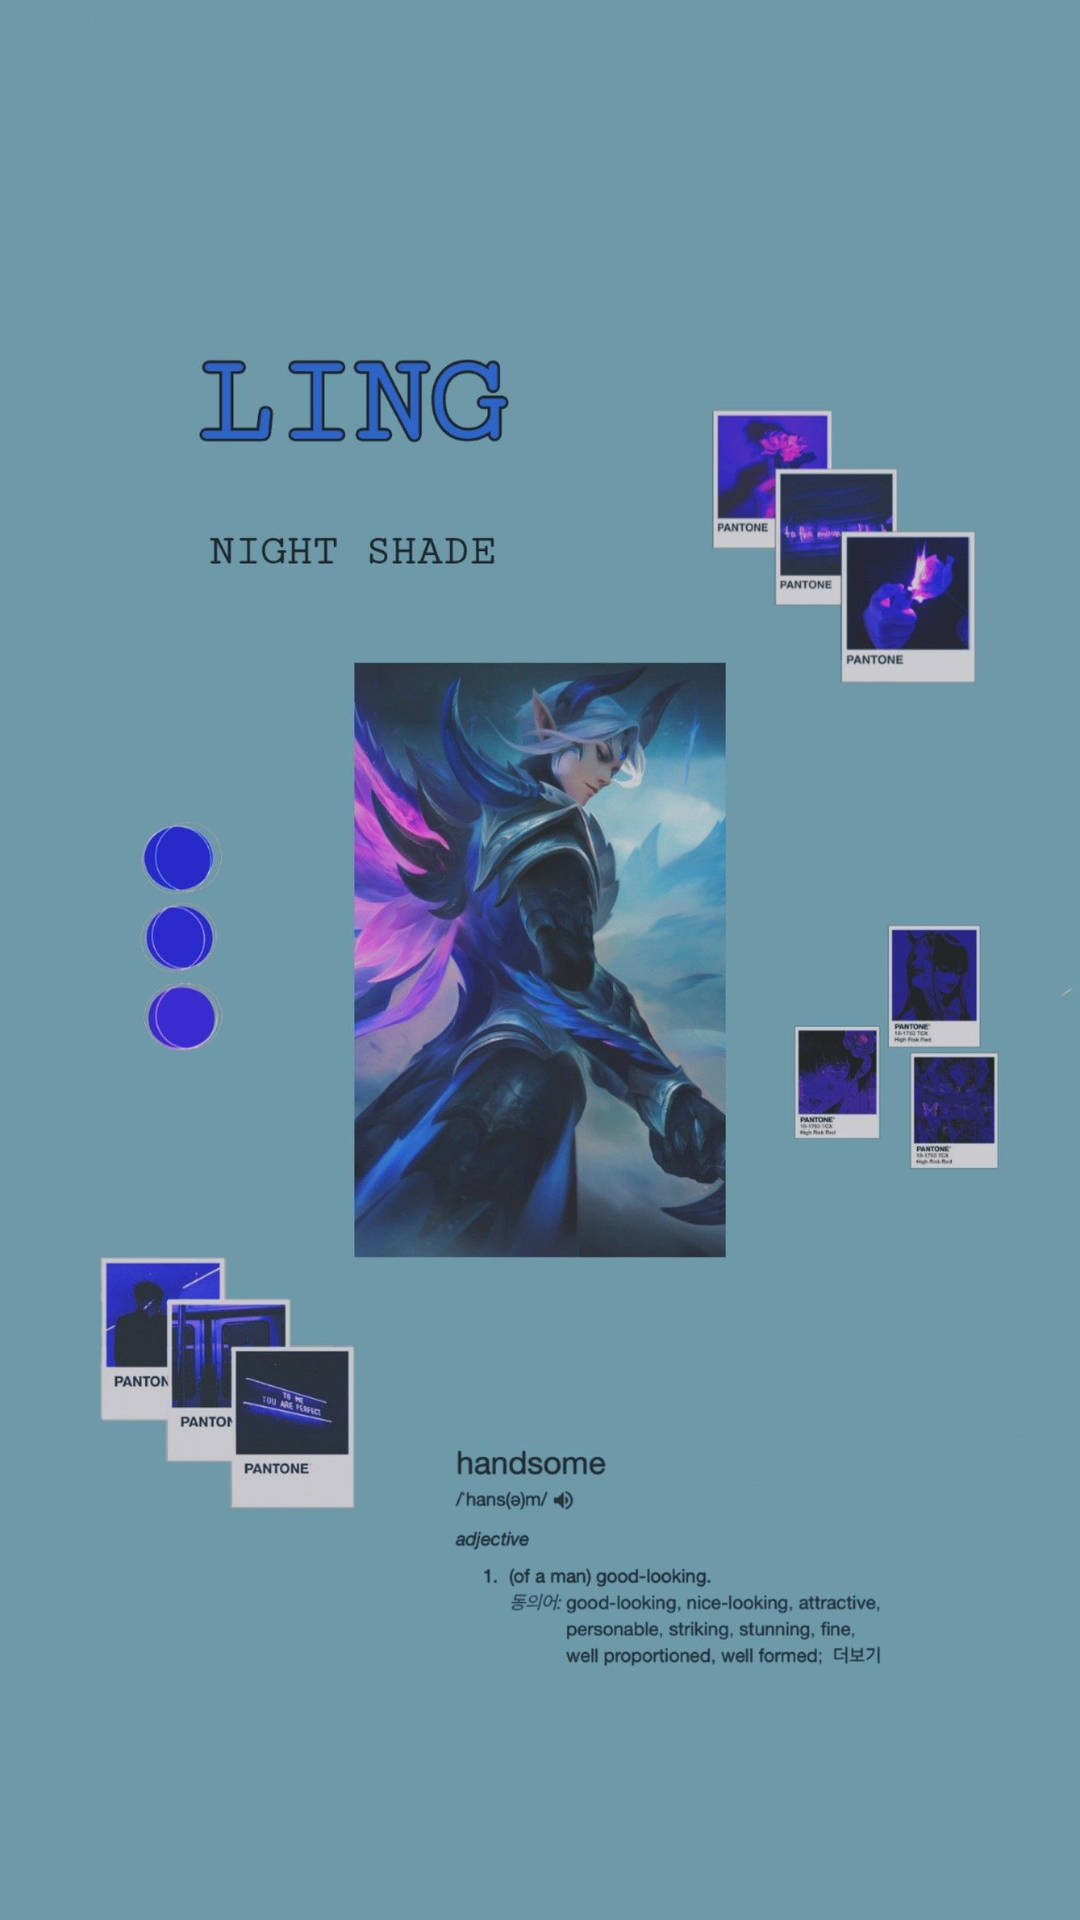 Ling Mobile Legends Night Shade Polaroid